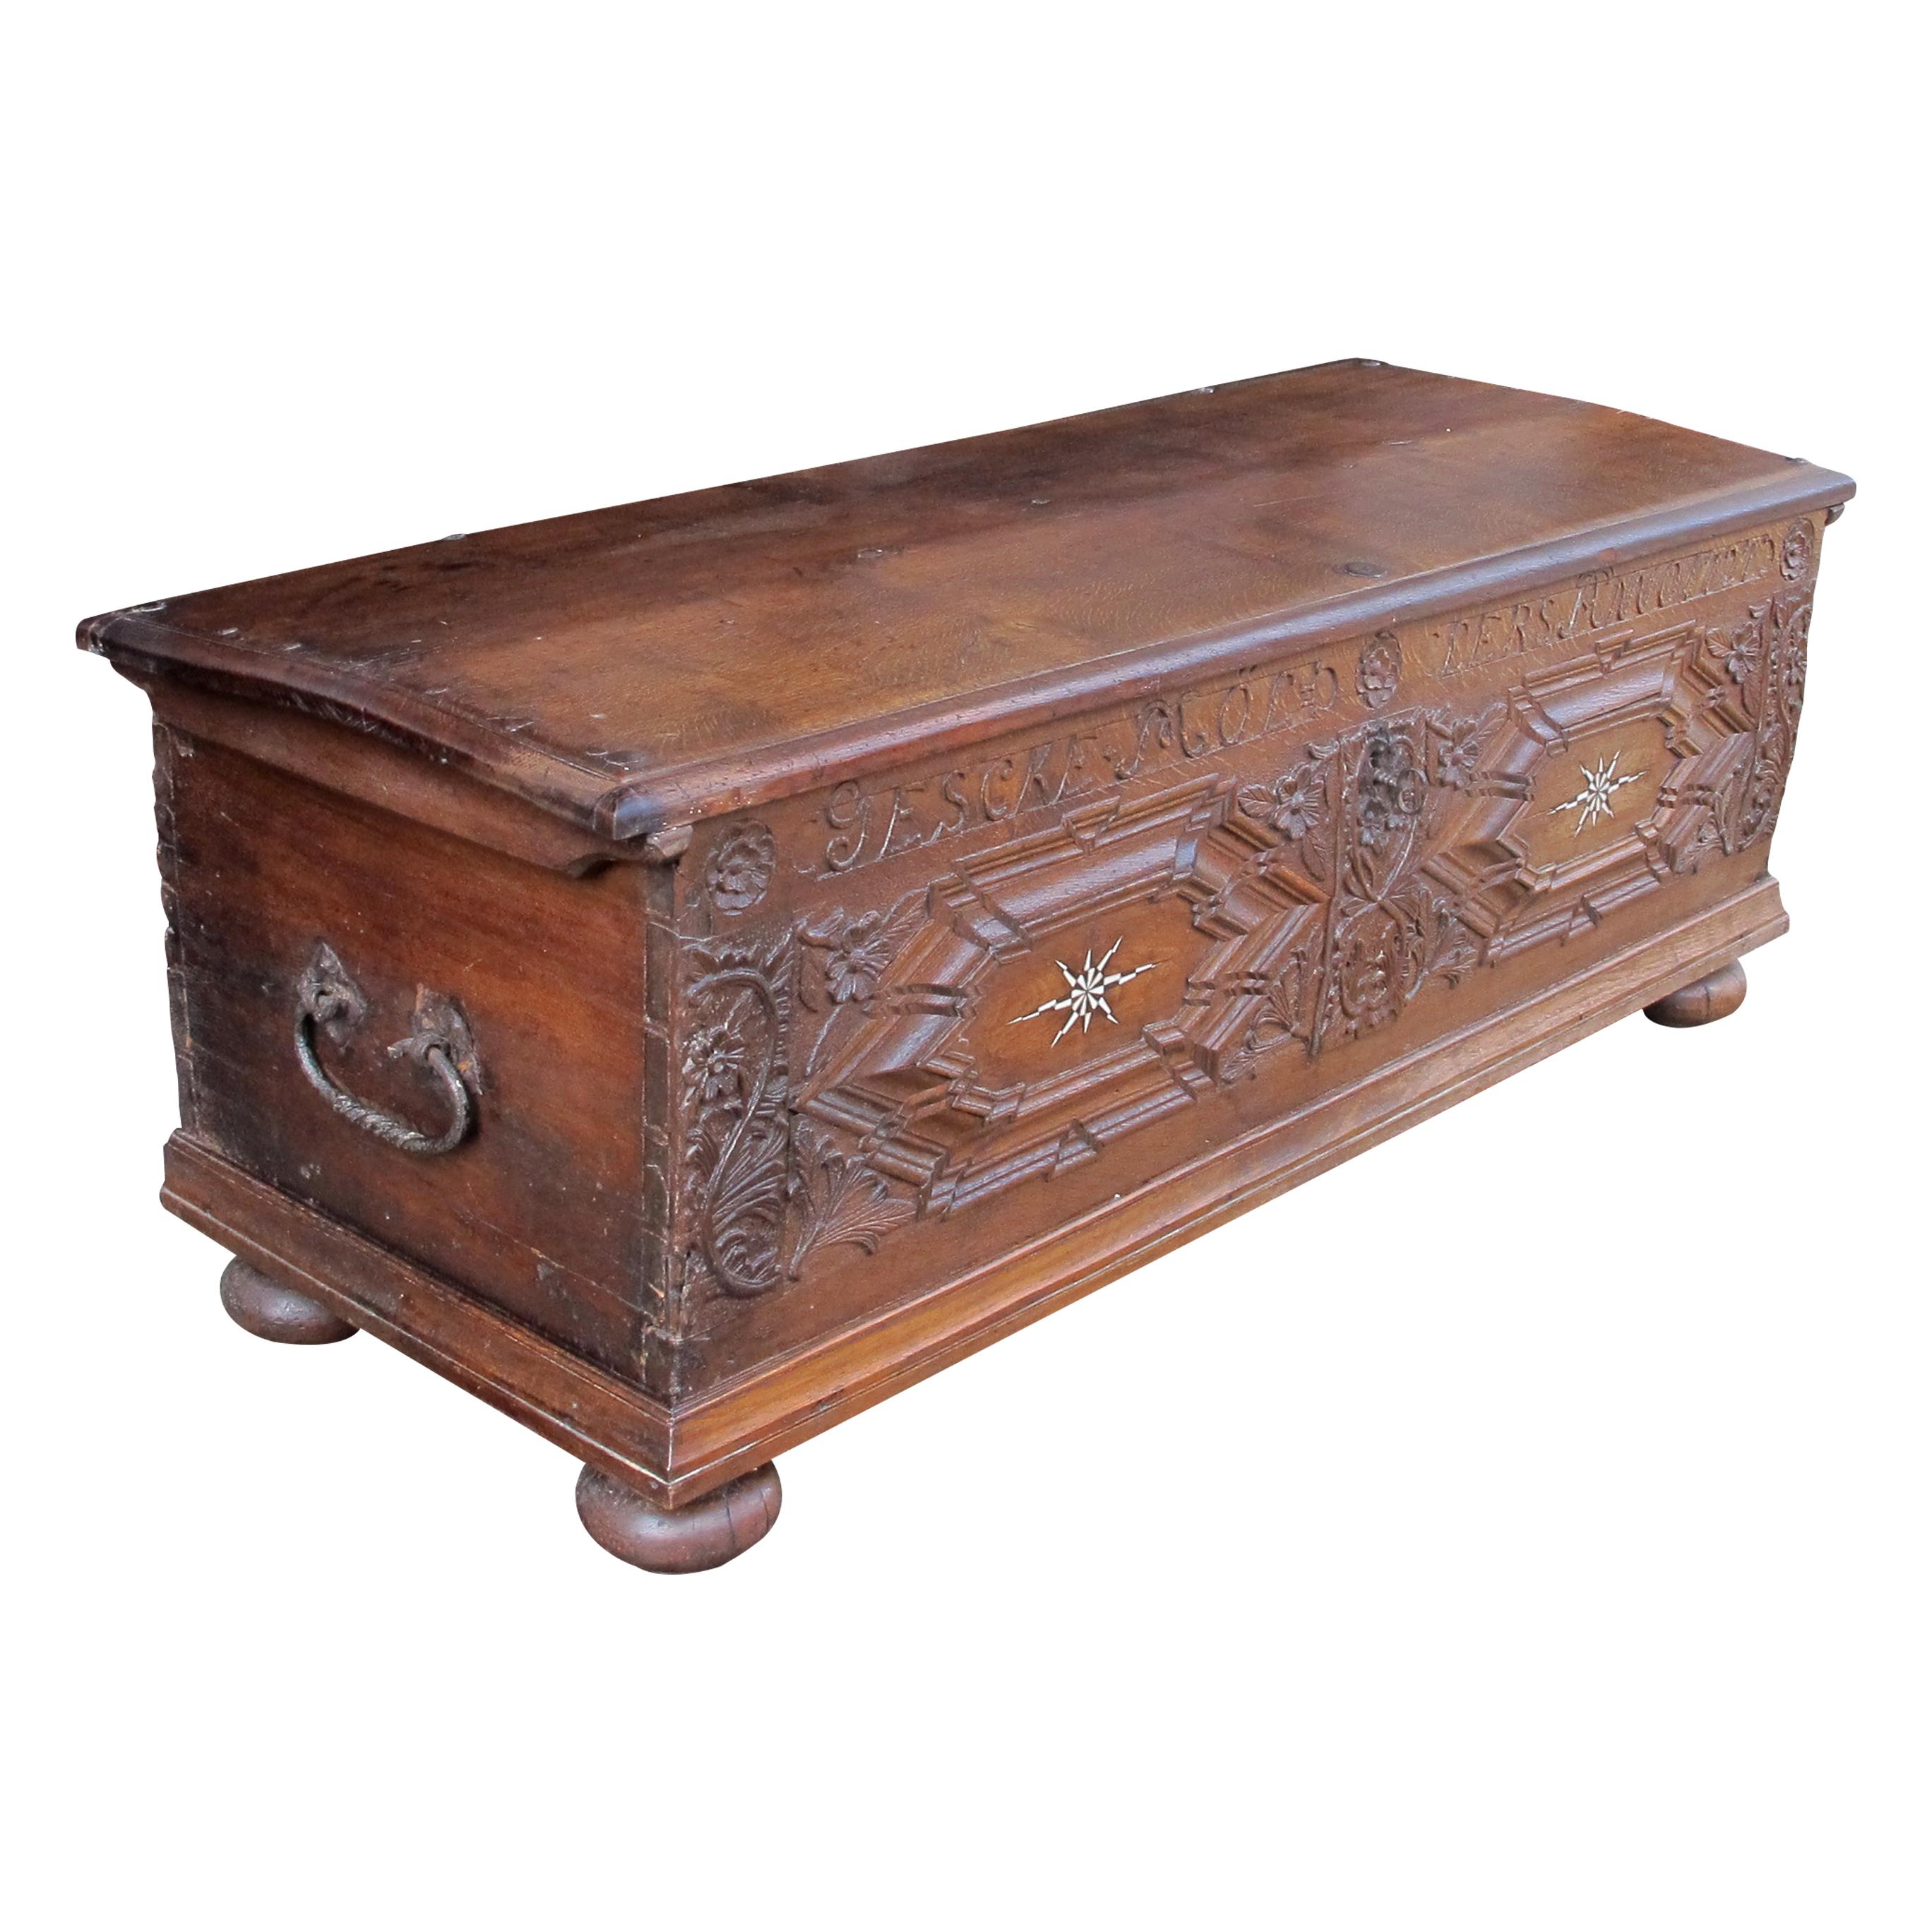 This 1727 oak trunk is of magnificent craftsmanship, showcasing intricate carvings and exquisite attention to detail. Crafted from solid oak, the trunk is sturdy and substantial, reflecting the robustness and durability characteristic of furniture